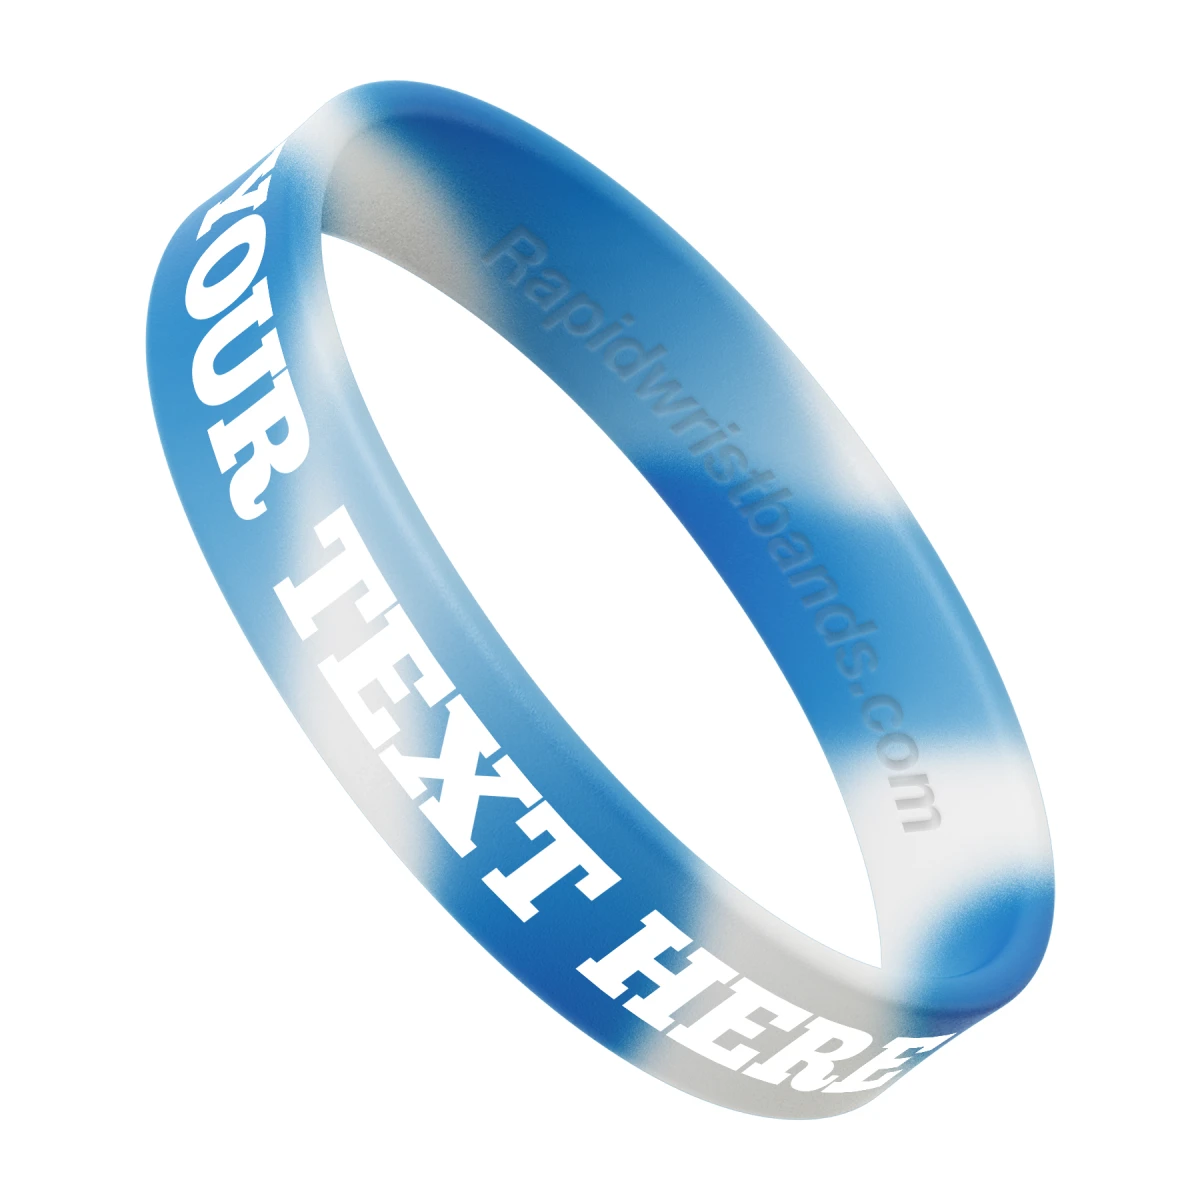 Swirl Blue/White Wristband With Your Text Here Printed In White